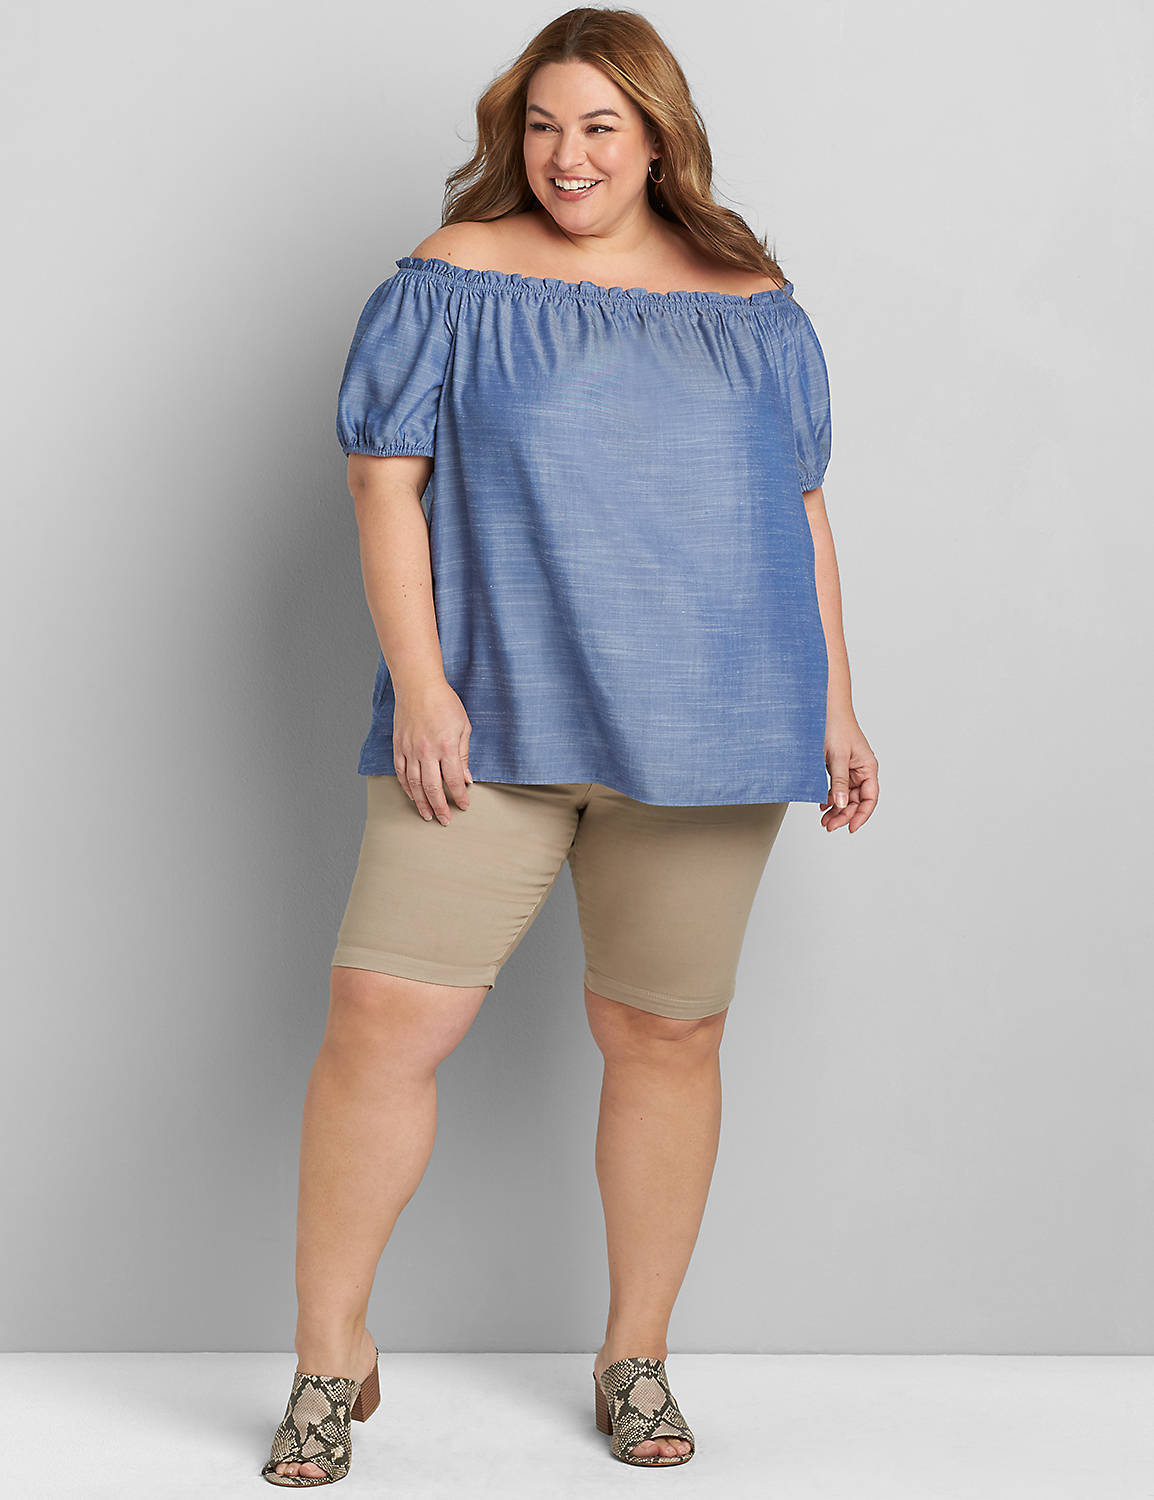 Short Puff Sleeve Off The Shoulder Chambray Top 1119589:Chambray:14/16 Product Image 3